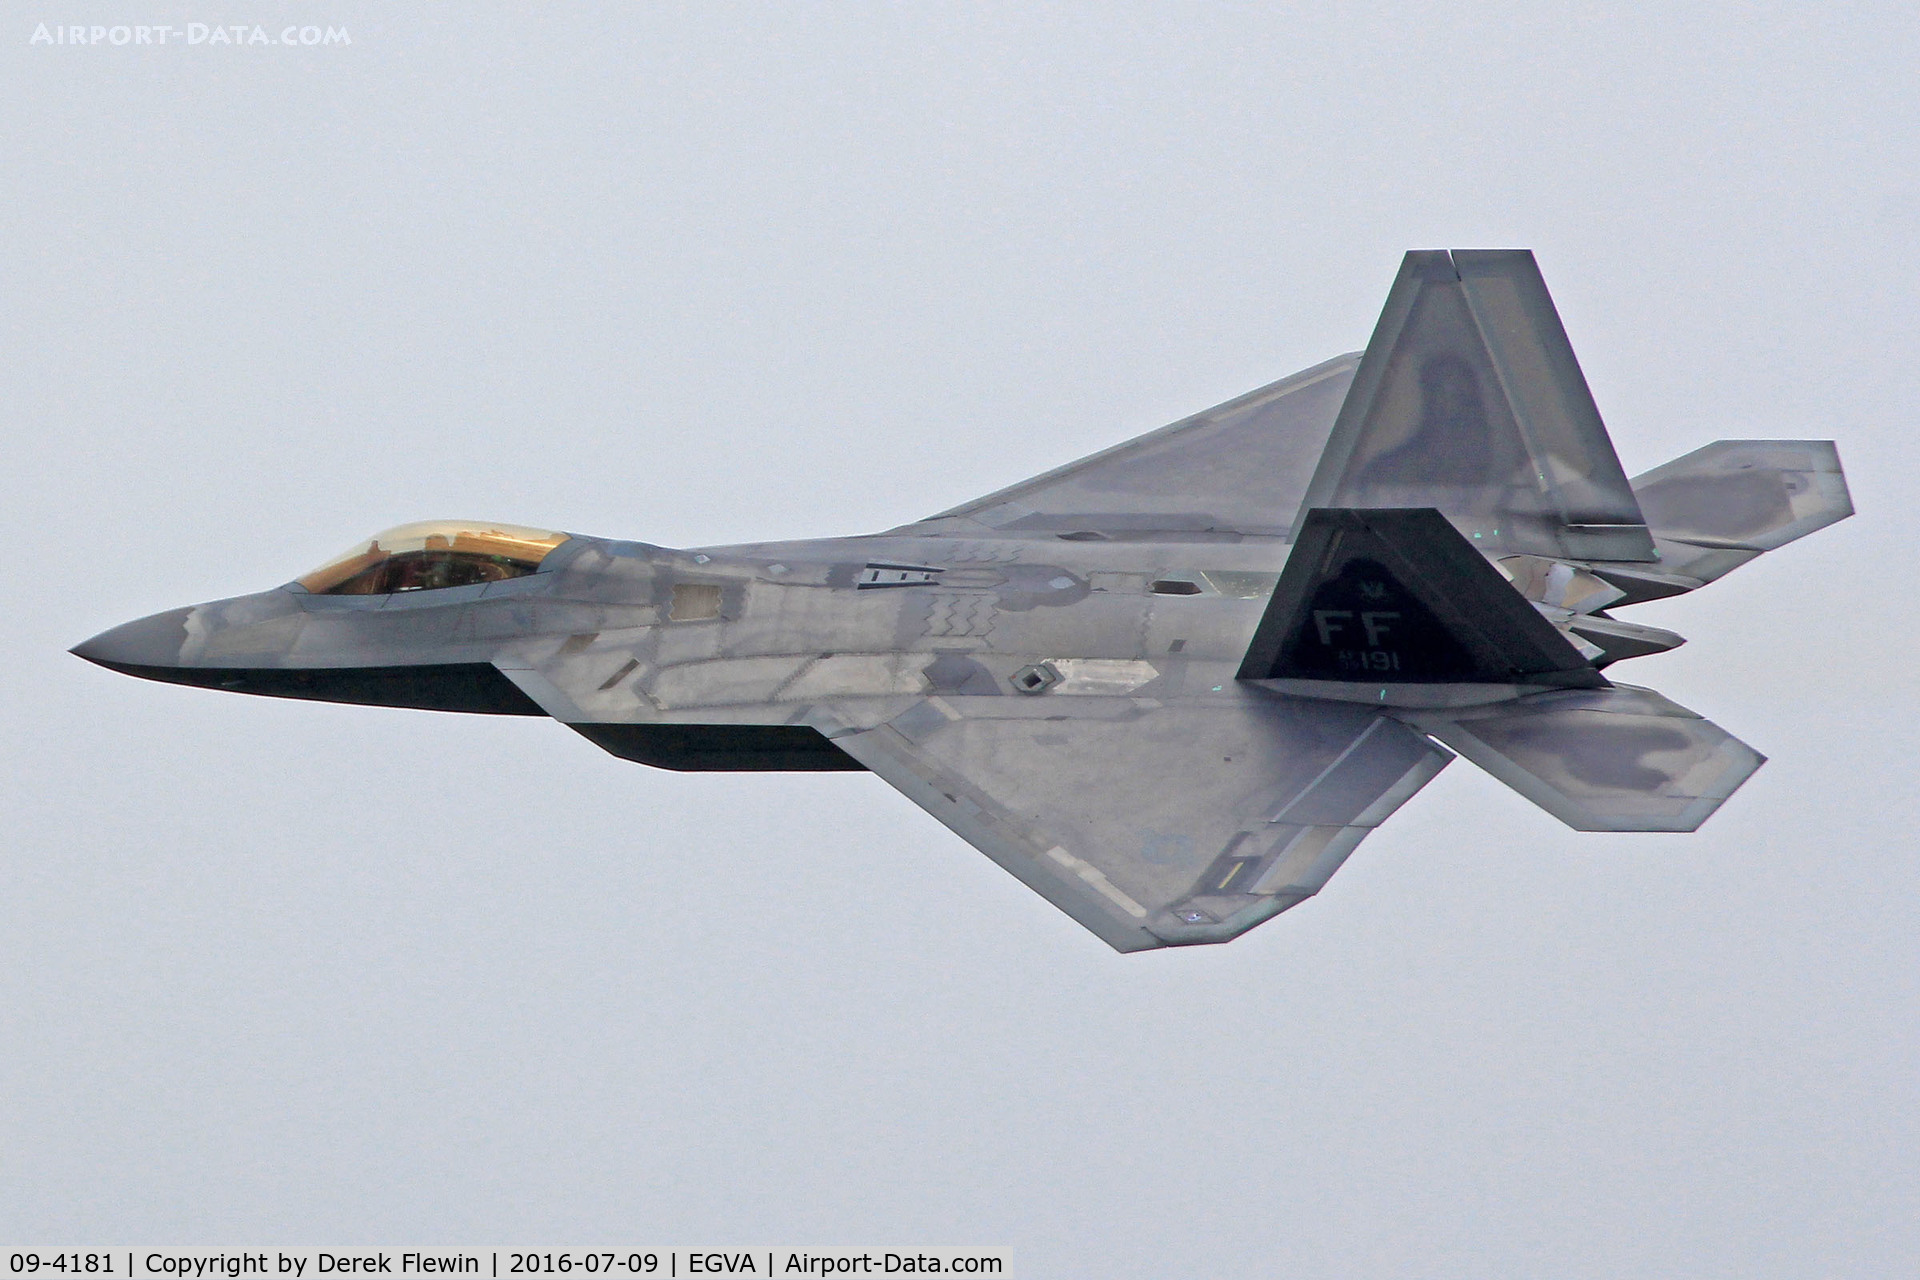 09-4181, Lockheed Martin F-22A Raptor C/N 4181, F-22A Raptor, United States Air Force, 94thFS 1stFW  Langley AFB based, coded FF, call sign Raptor, seen displaying at RIAT 2016.